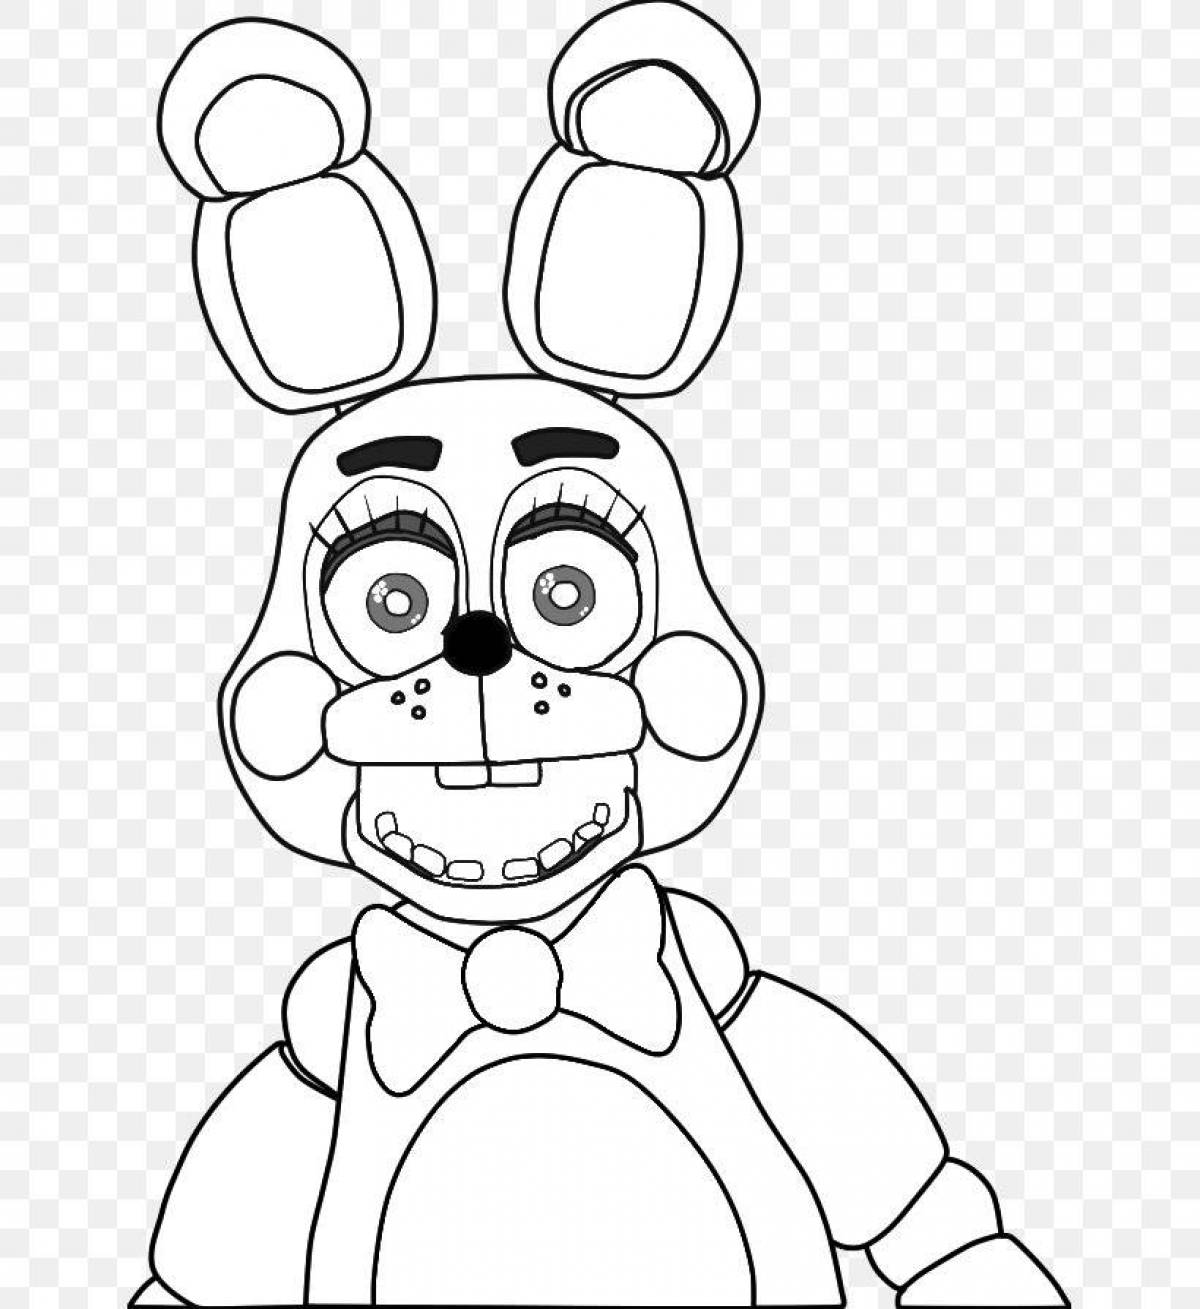 Glorious fnaf 2 coloring page